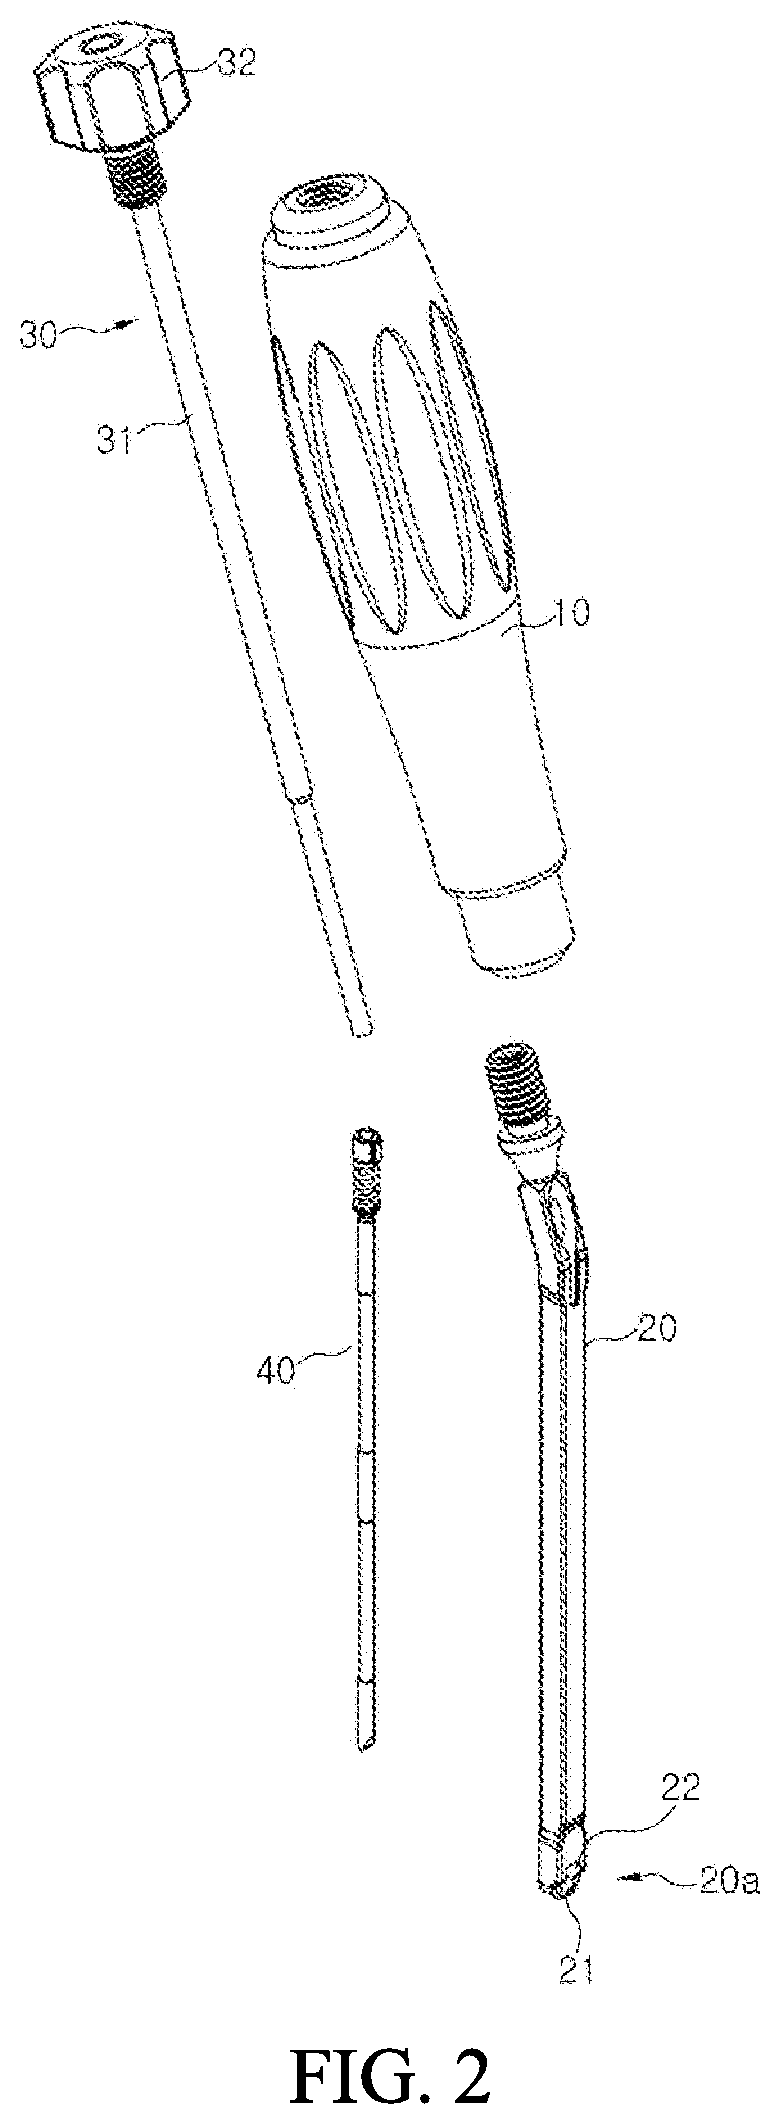 Apparatus for Spinal Surgery of Inserting Rod